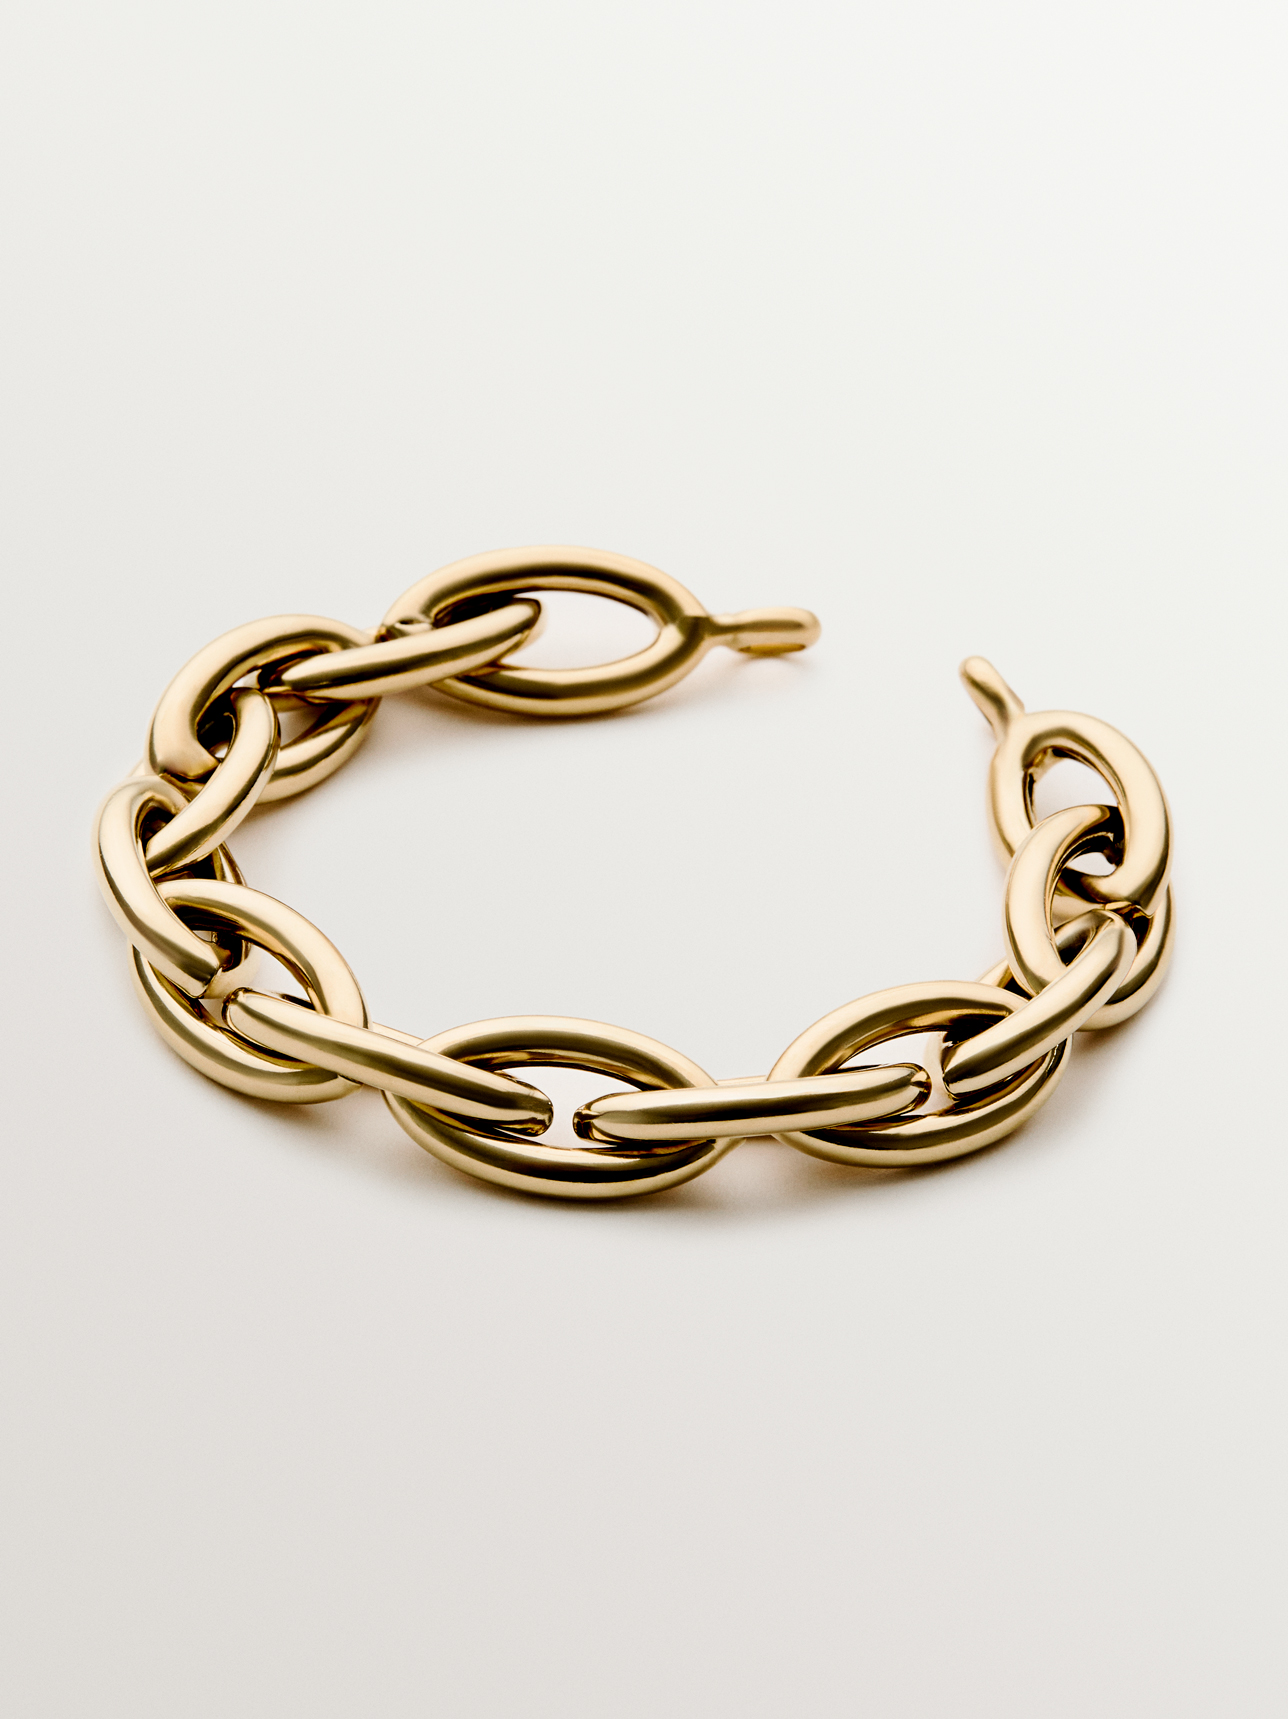 18K yellow gold plated 925 silver bracelet with oval links